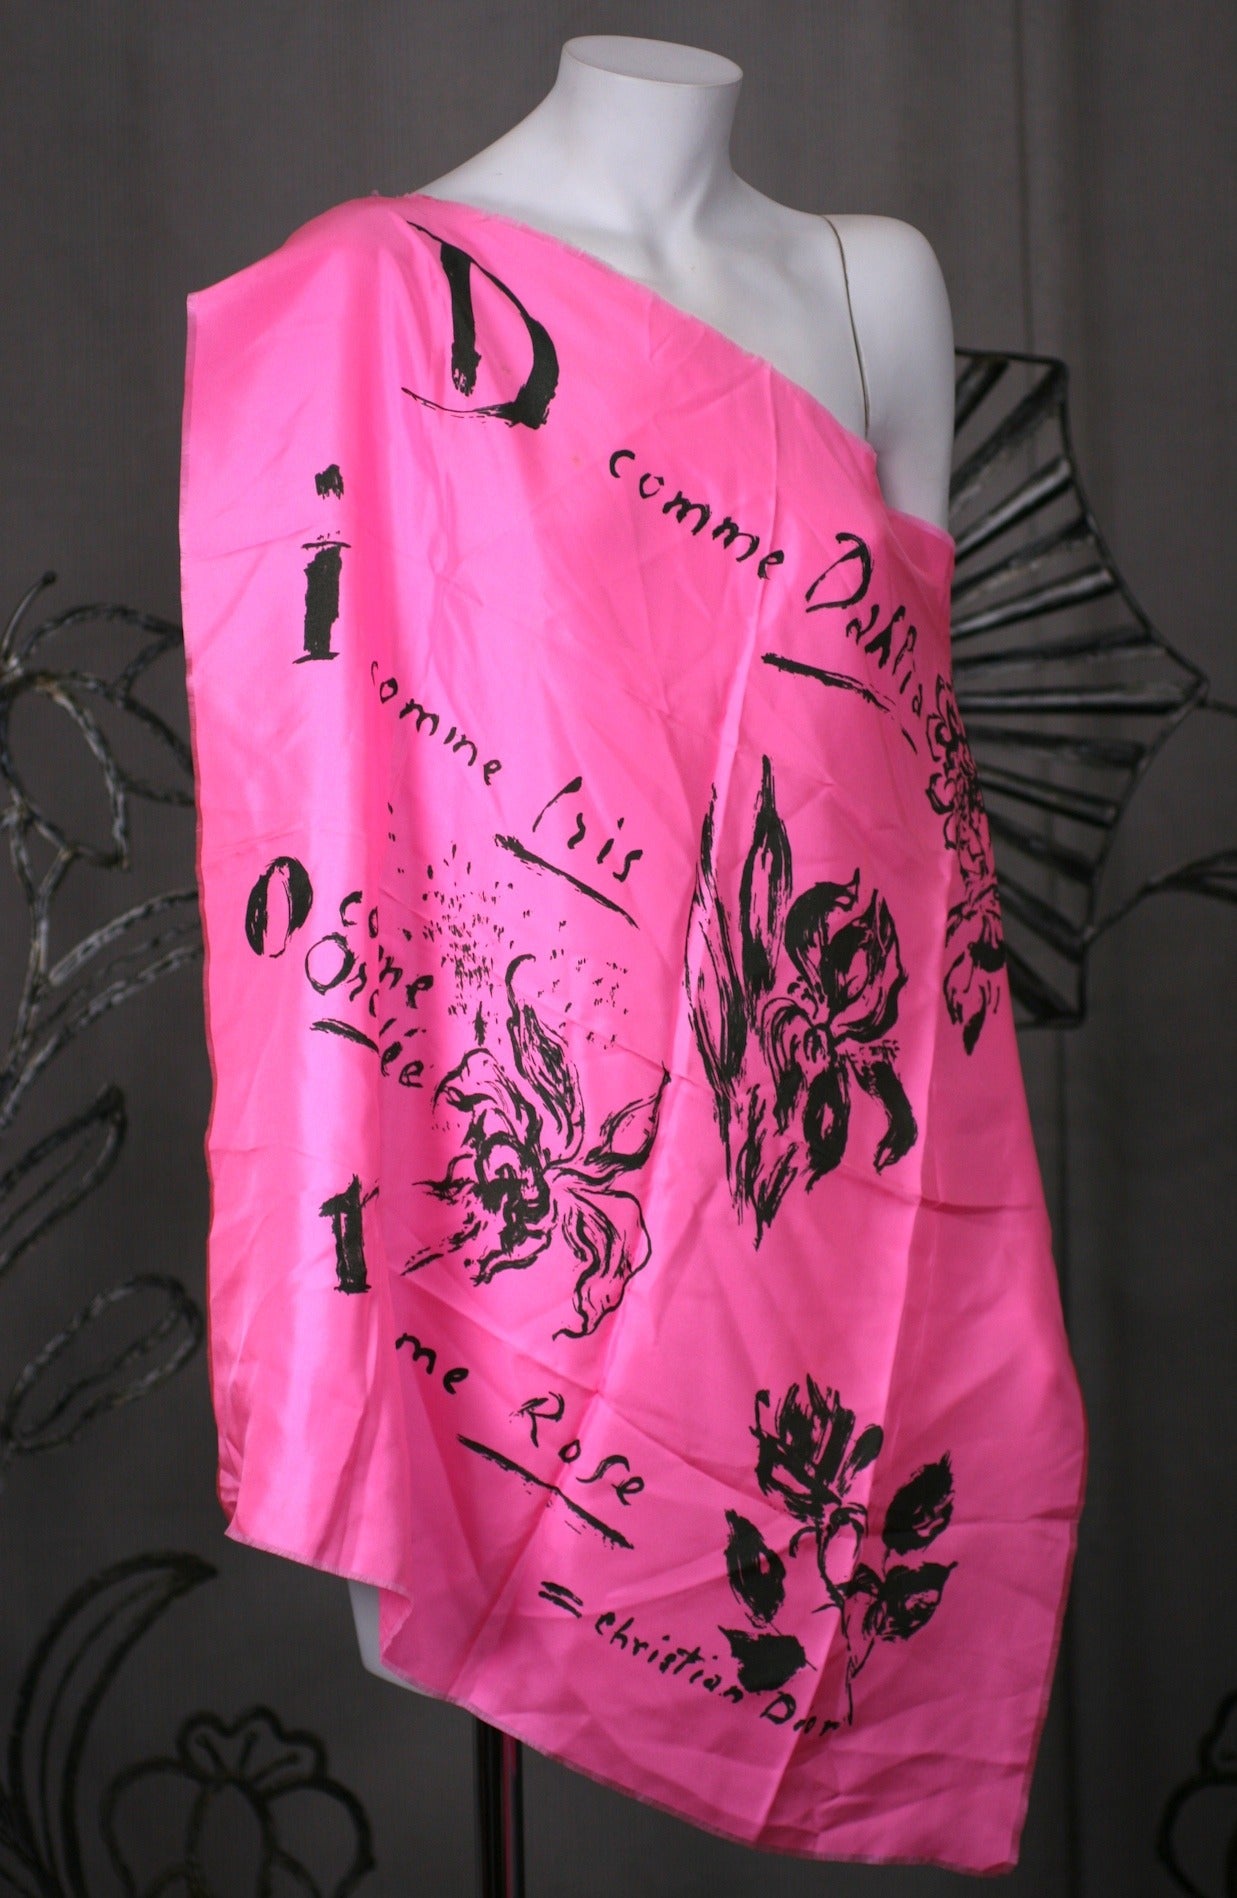 Christian Dior's silk flower scarf printed with Dior's name and corresponding flowers he loved. Self fringe. 26